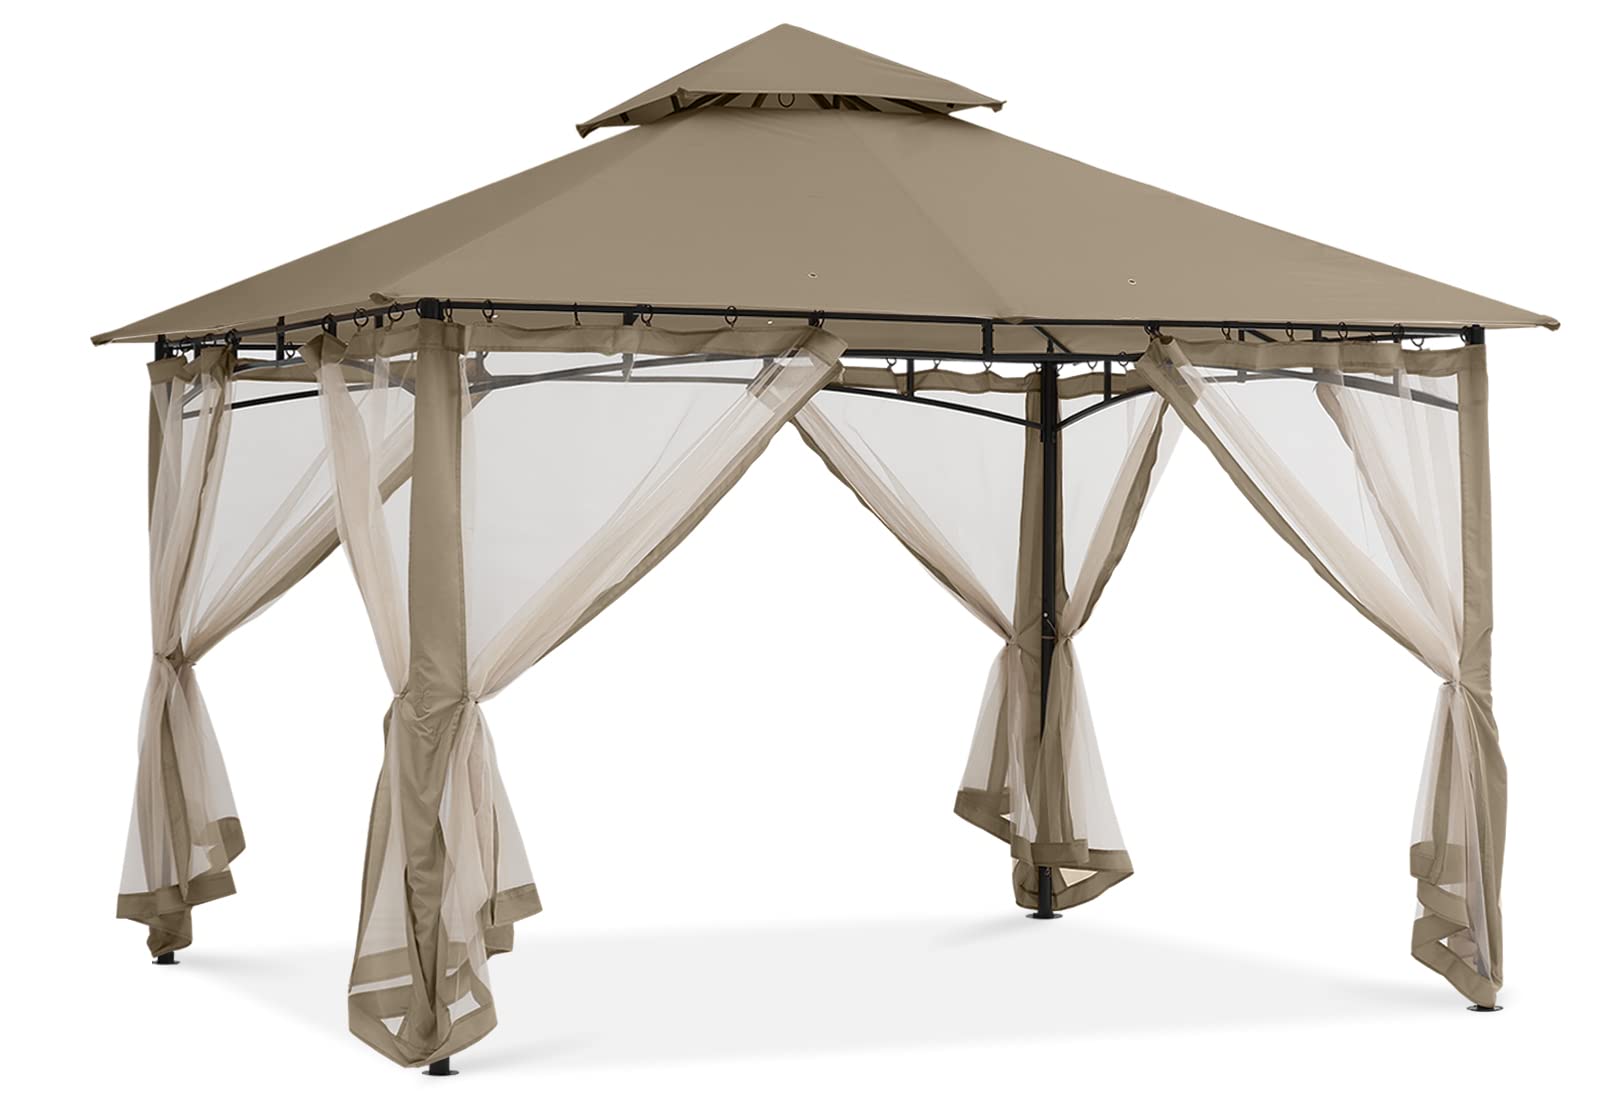 Sturdy Patio Gazebo 10 Ft x 12 Ft with Mosquito Netting by ABCCANOPY